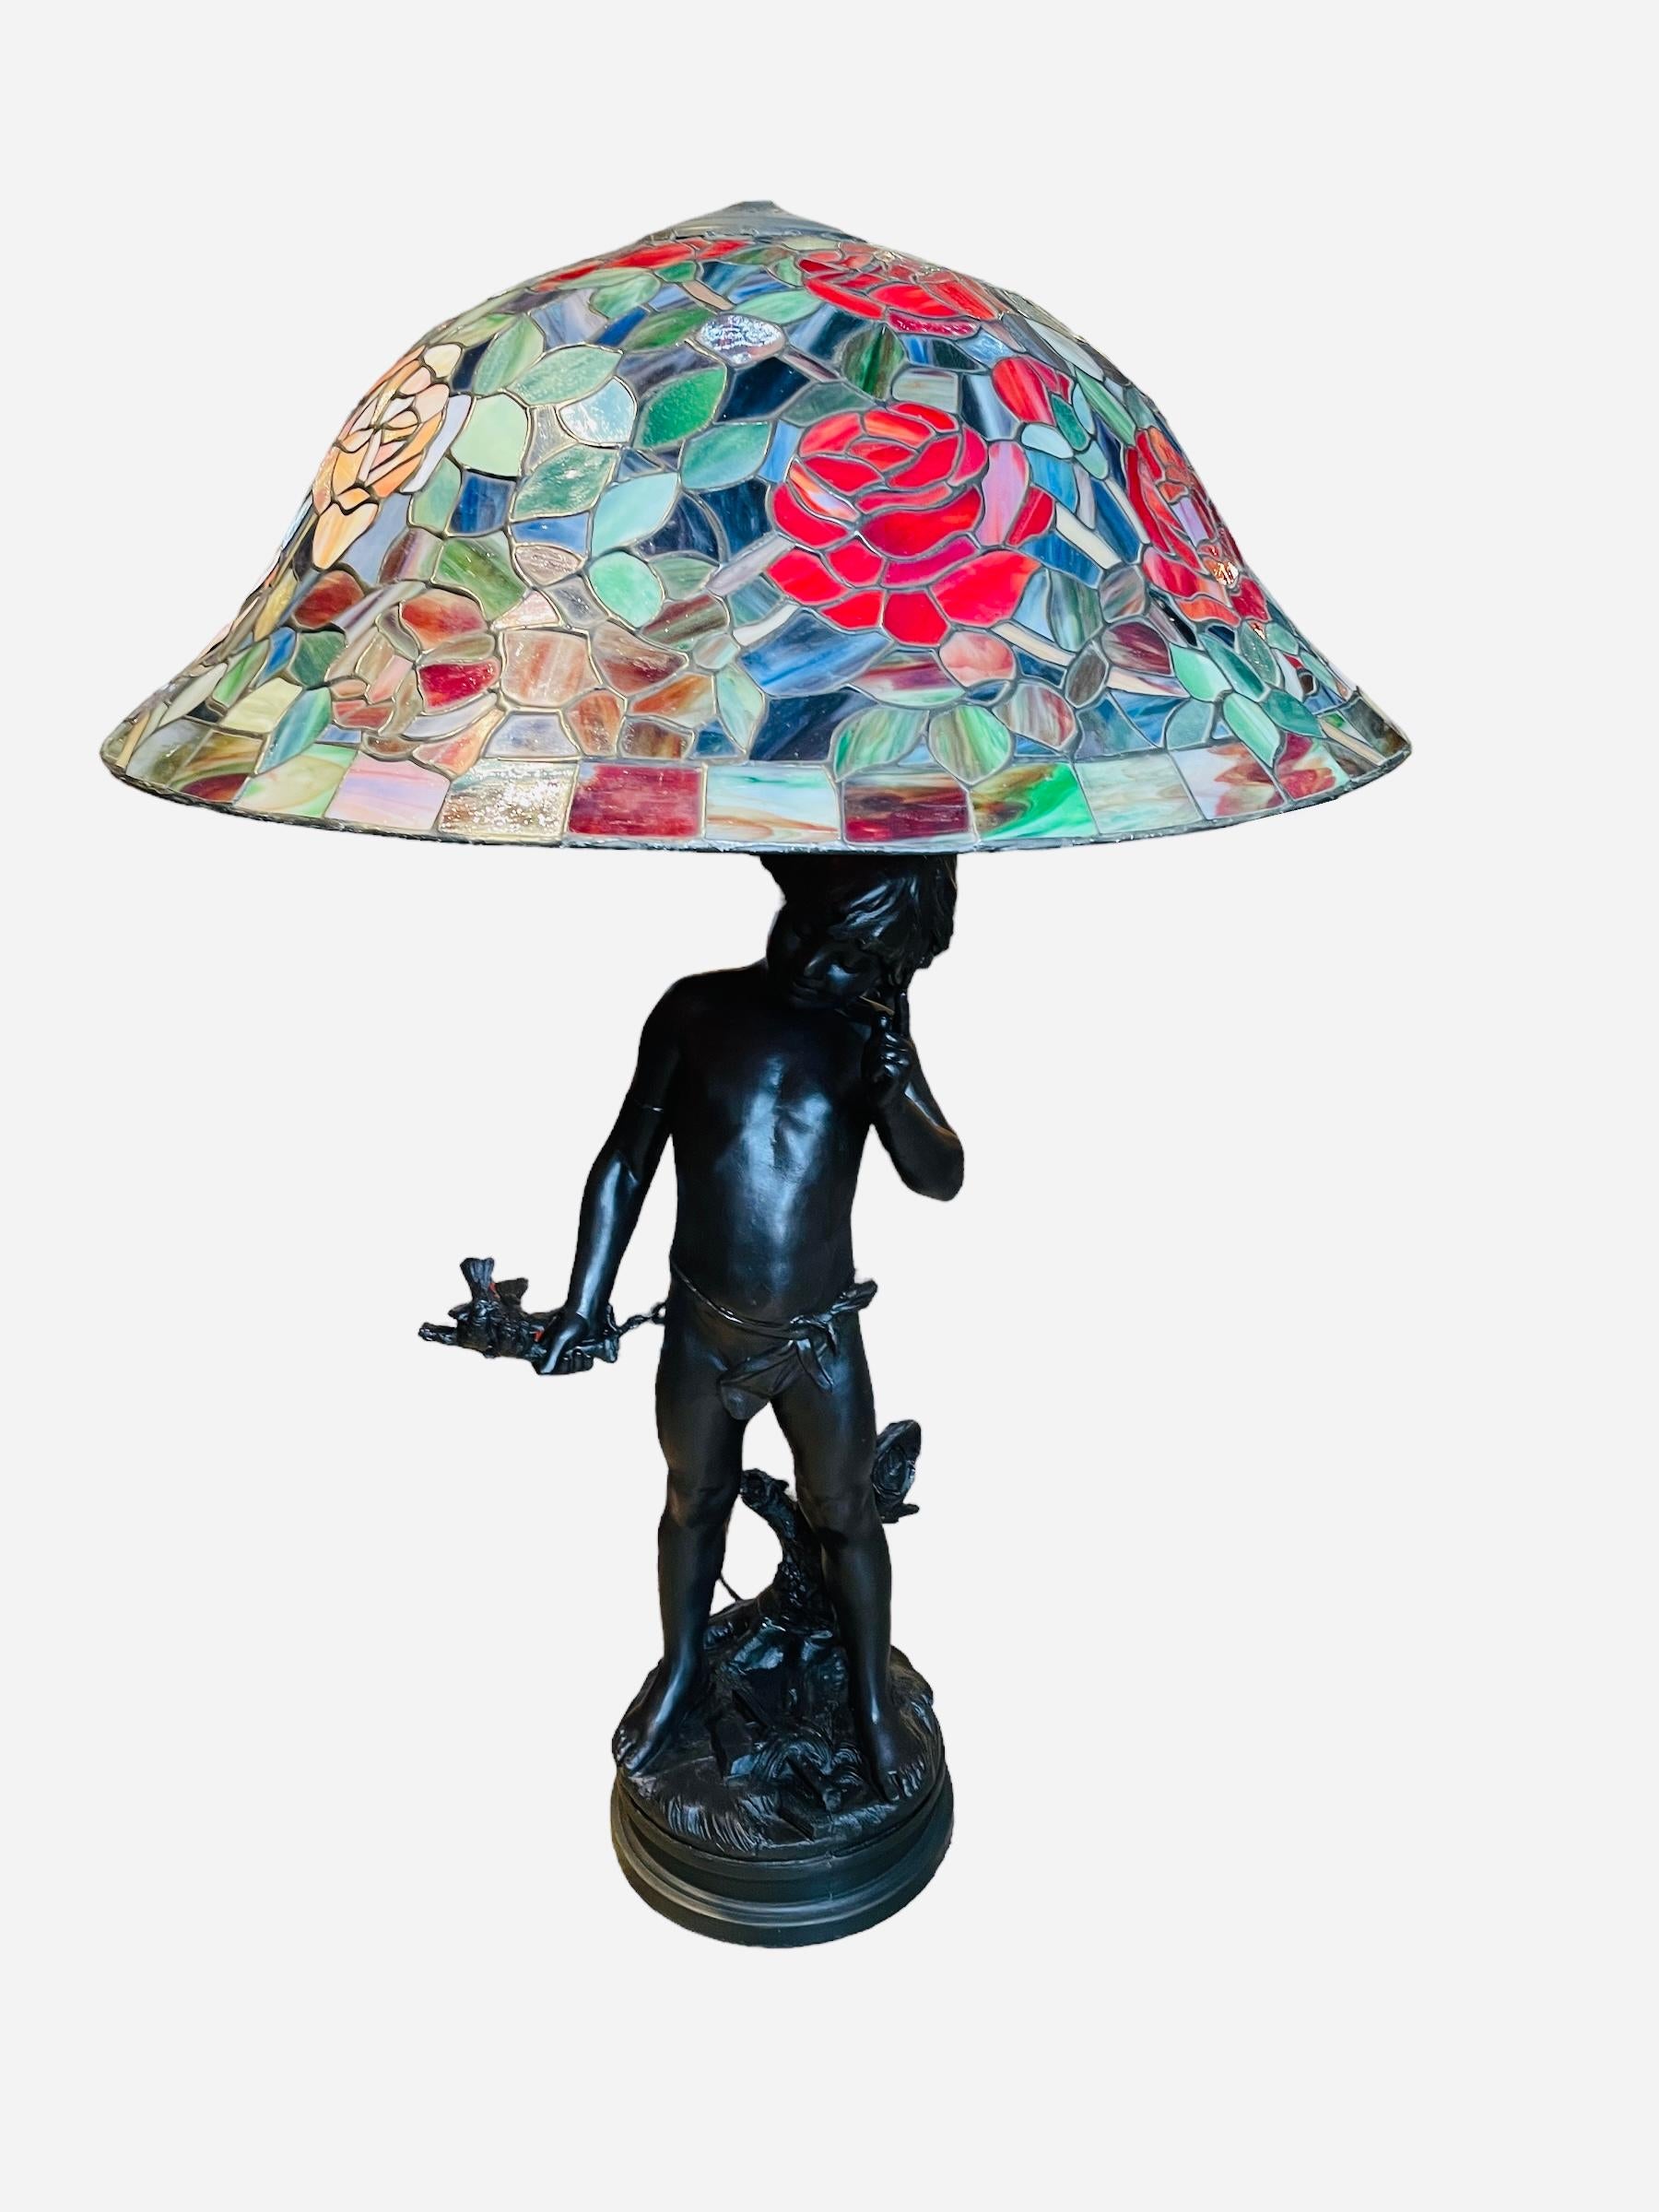 Auguste Moreau “Charmeur” Patinated Metal Sculpture Lamp For Sale at ...